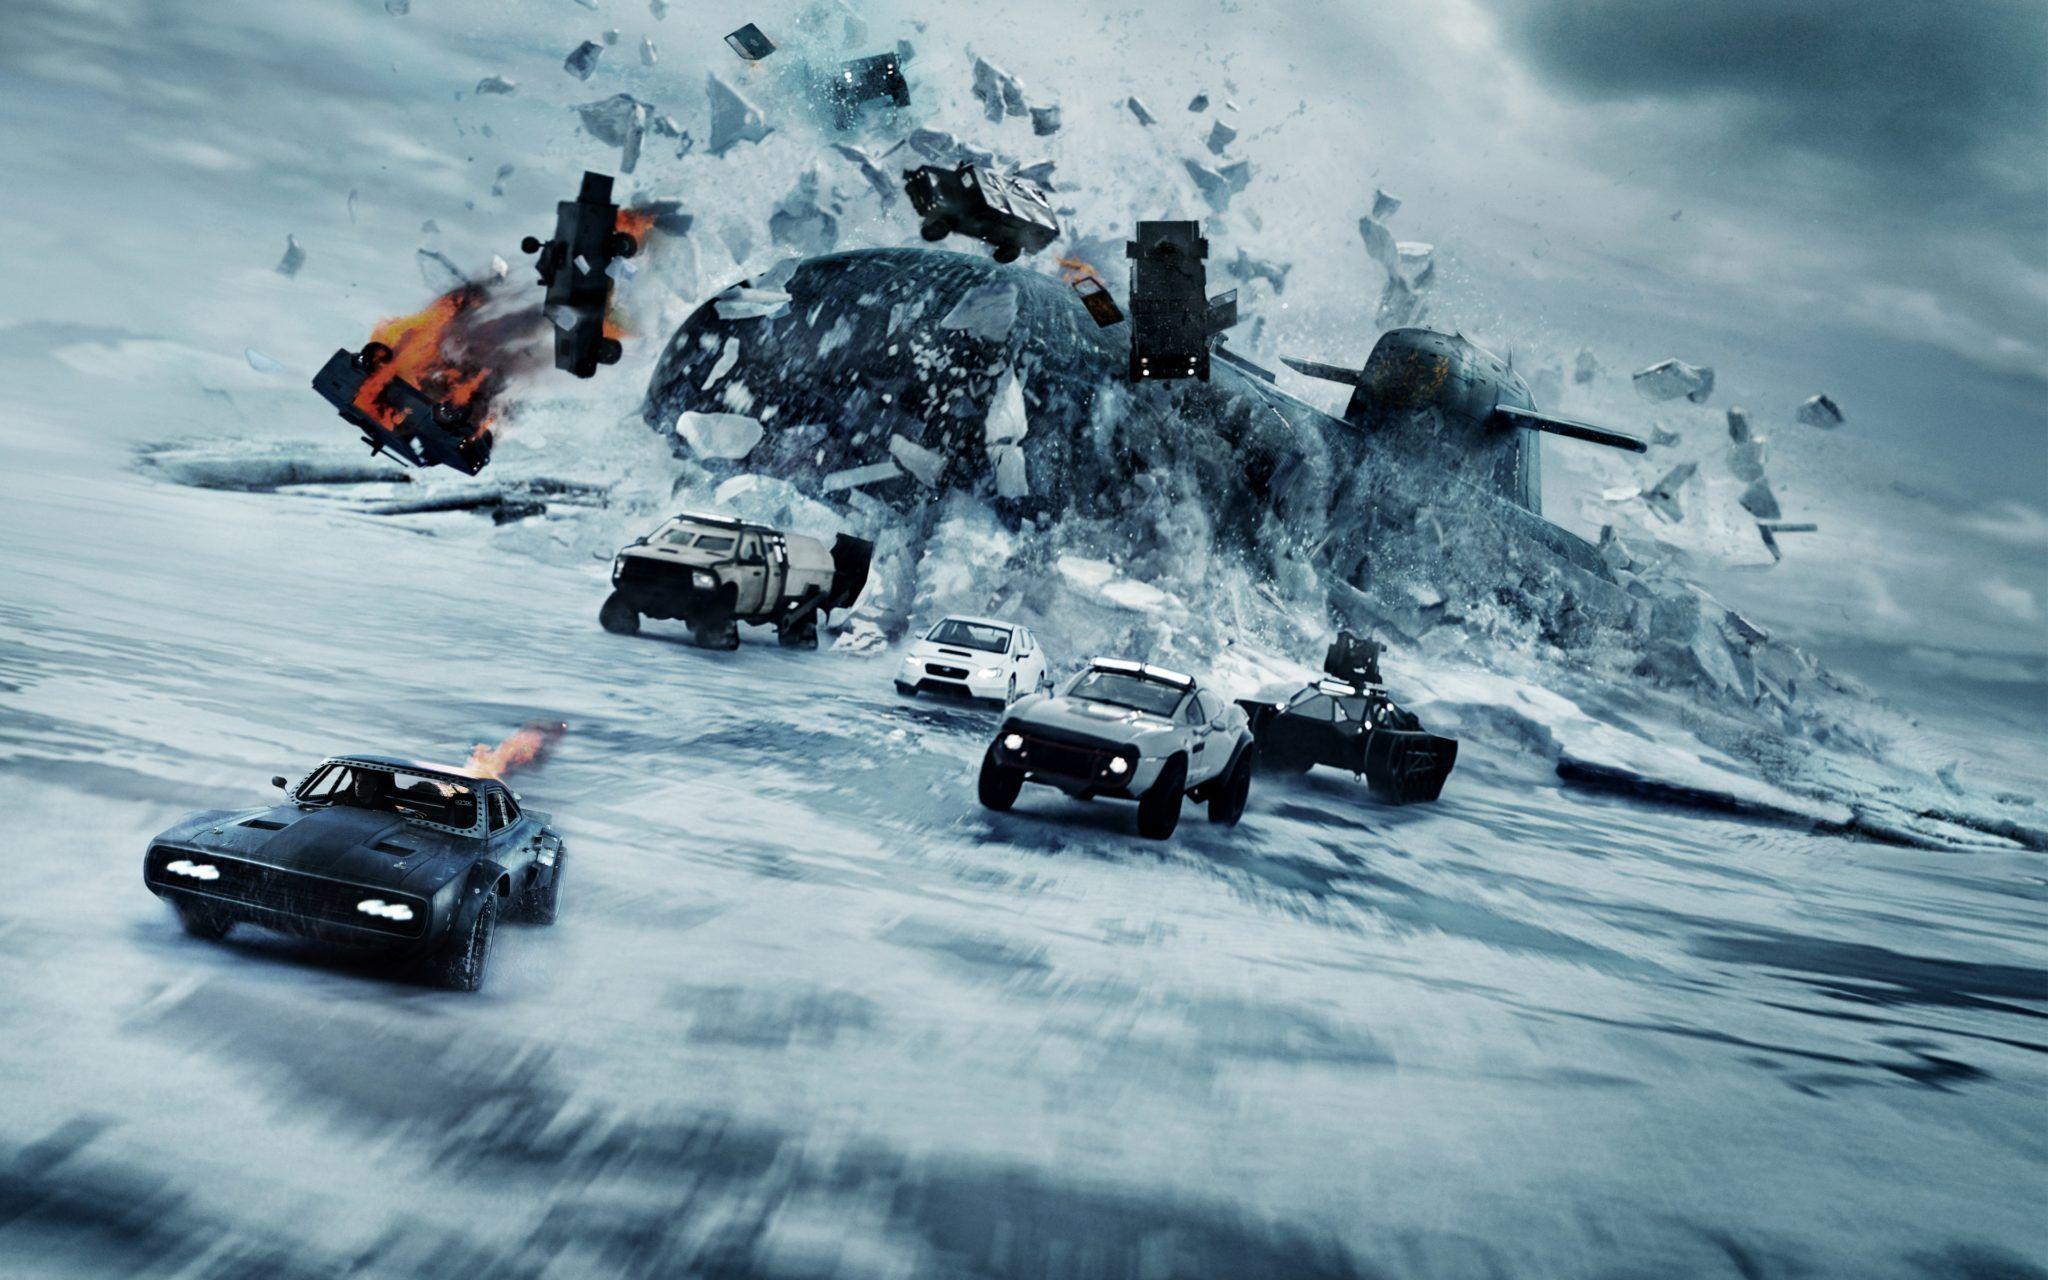 The Fate of The Furious 4K HD Wallpaper